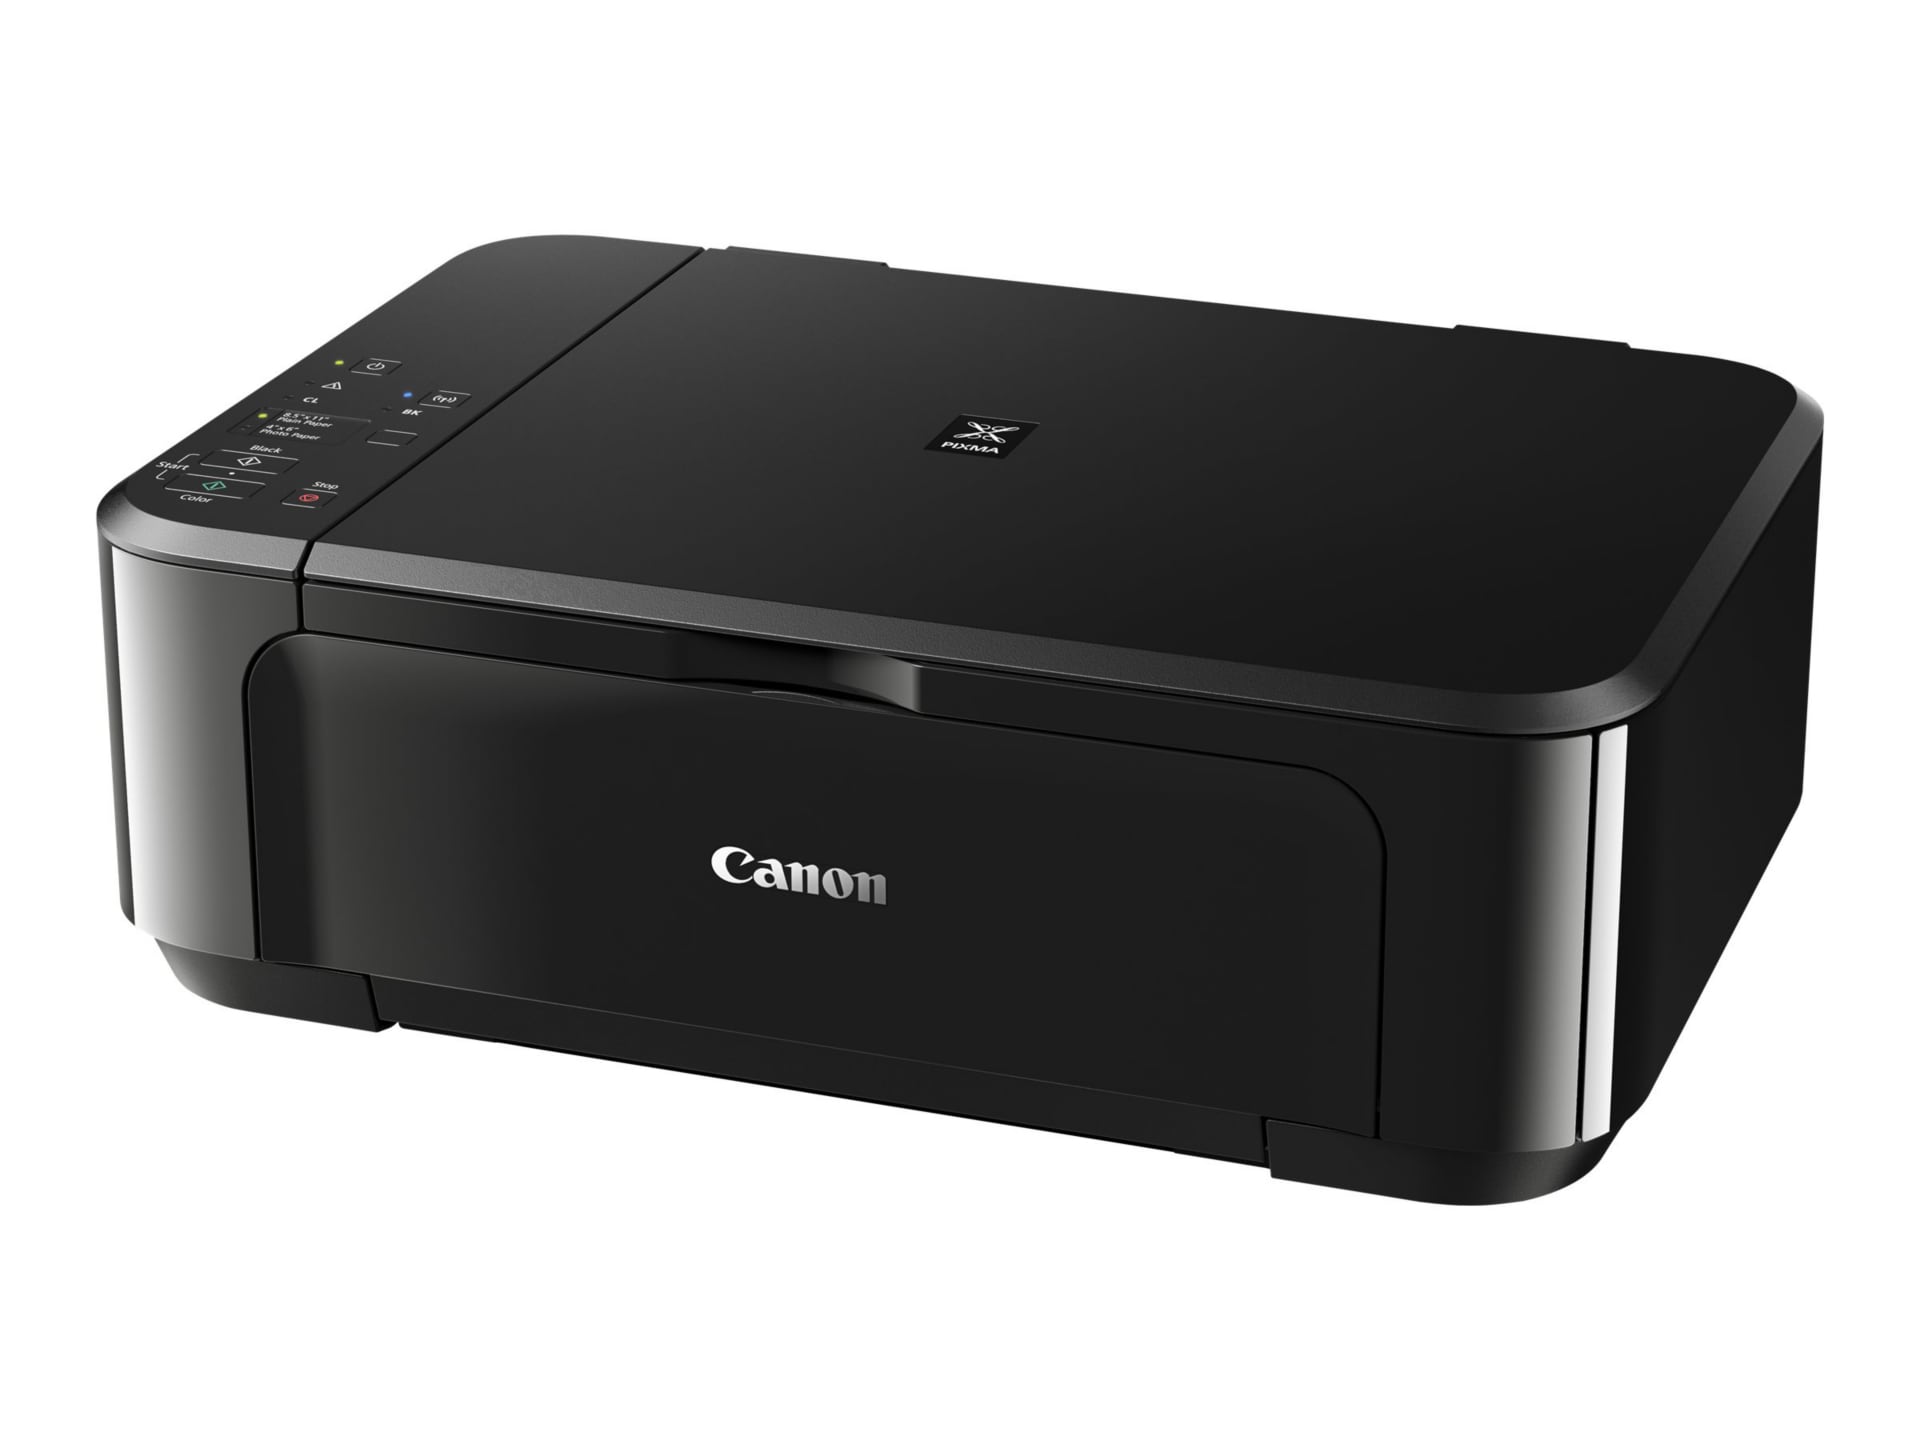 Canon PIXMA MG3620 - multifunction printer - color - with Canon InstantExch